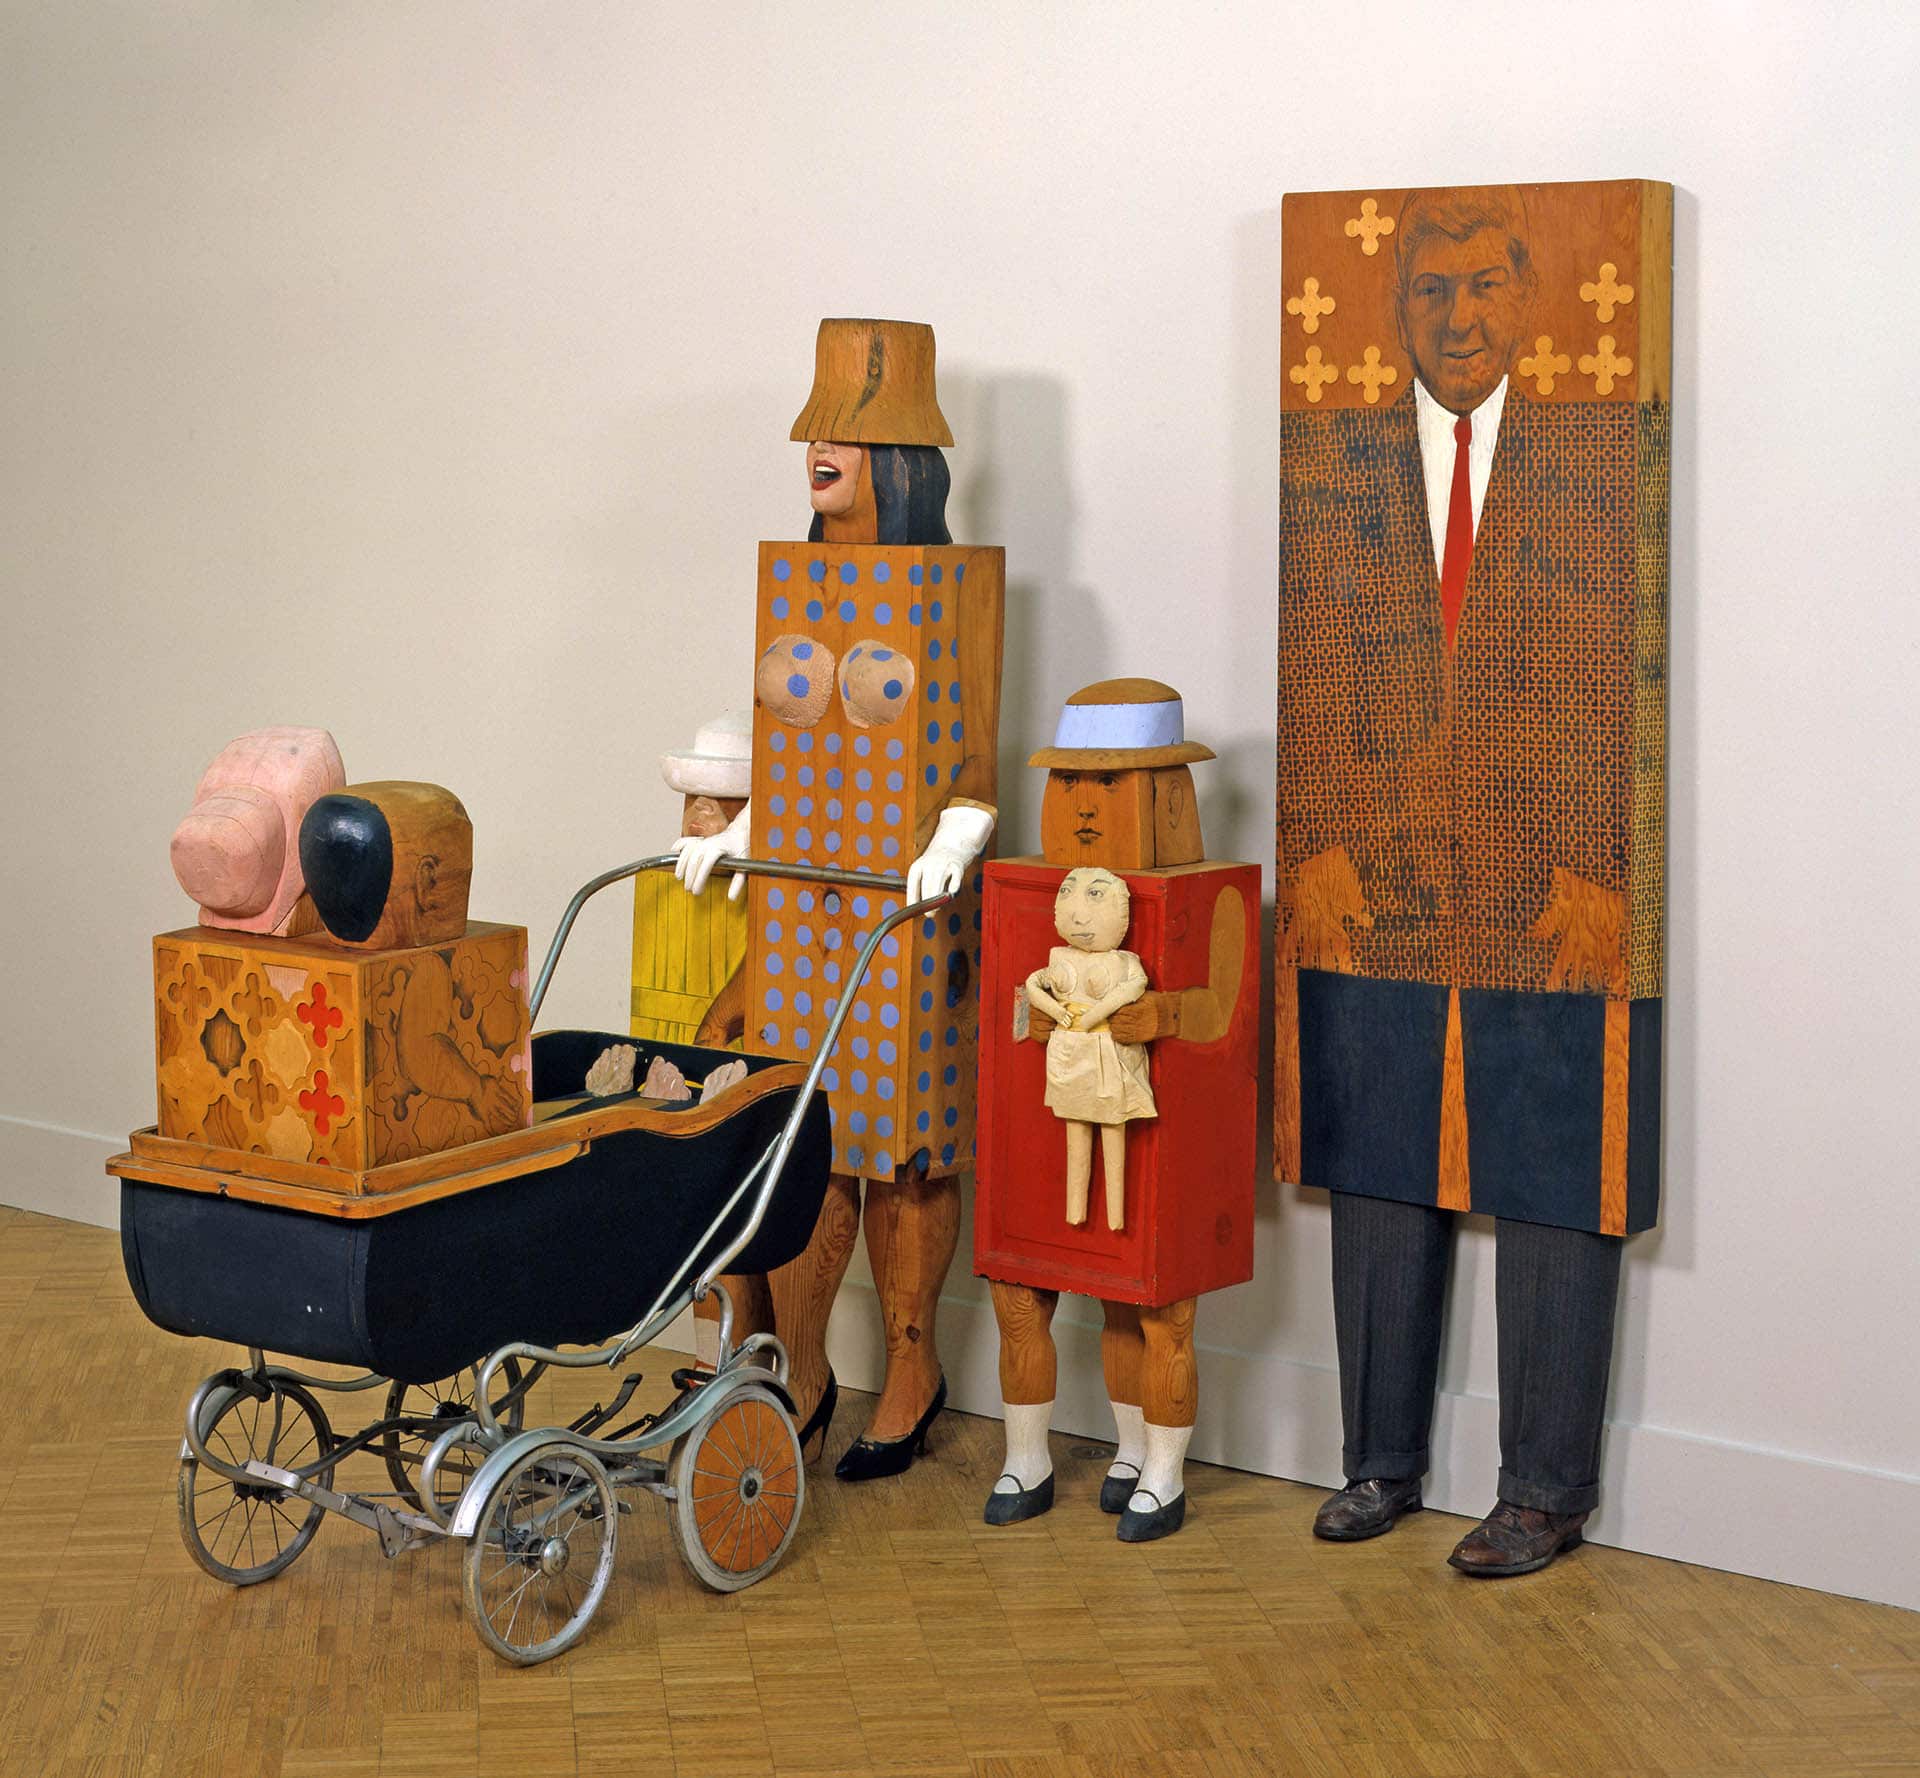 a sculpture of 5 people made of boxes, a mother, father, two daughters and baby in a carriage